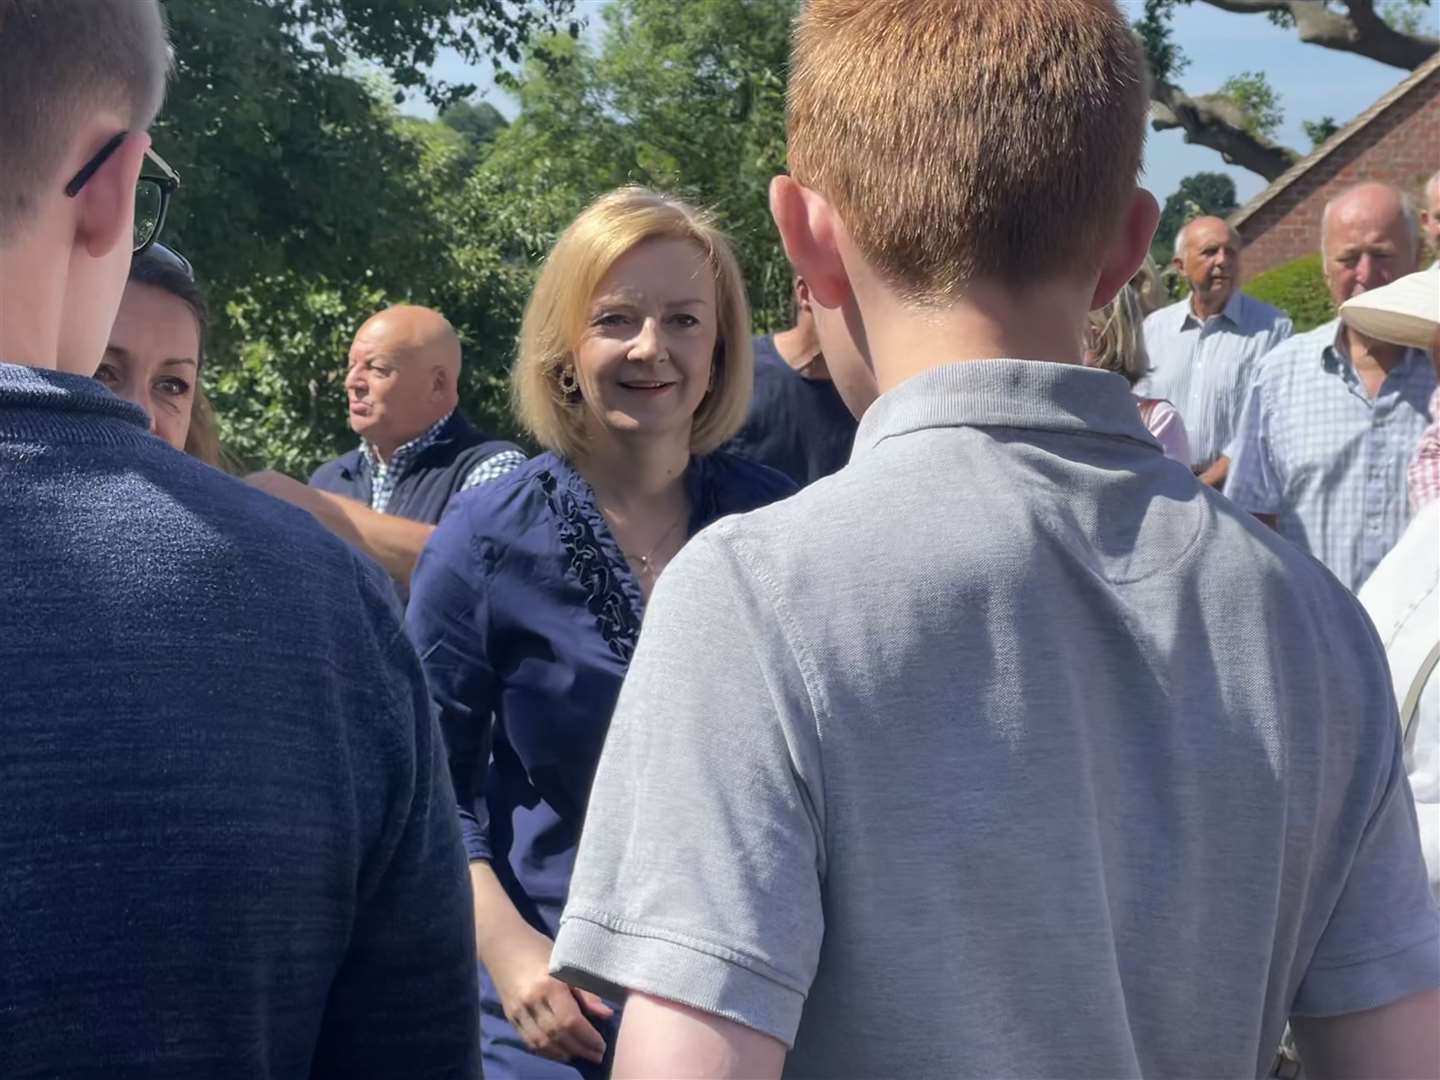 Liz Truss visited Sevenoaks in July - and within less than three months had become Prime Minister and resigned